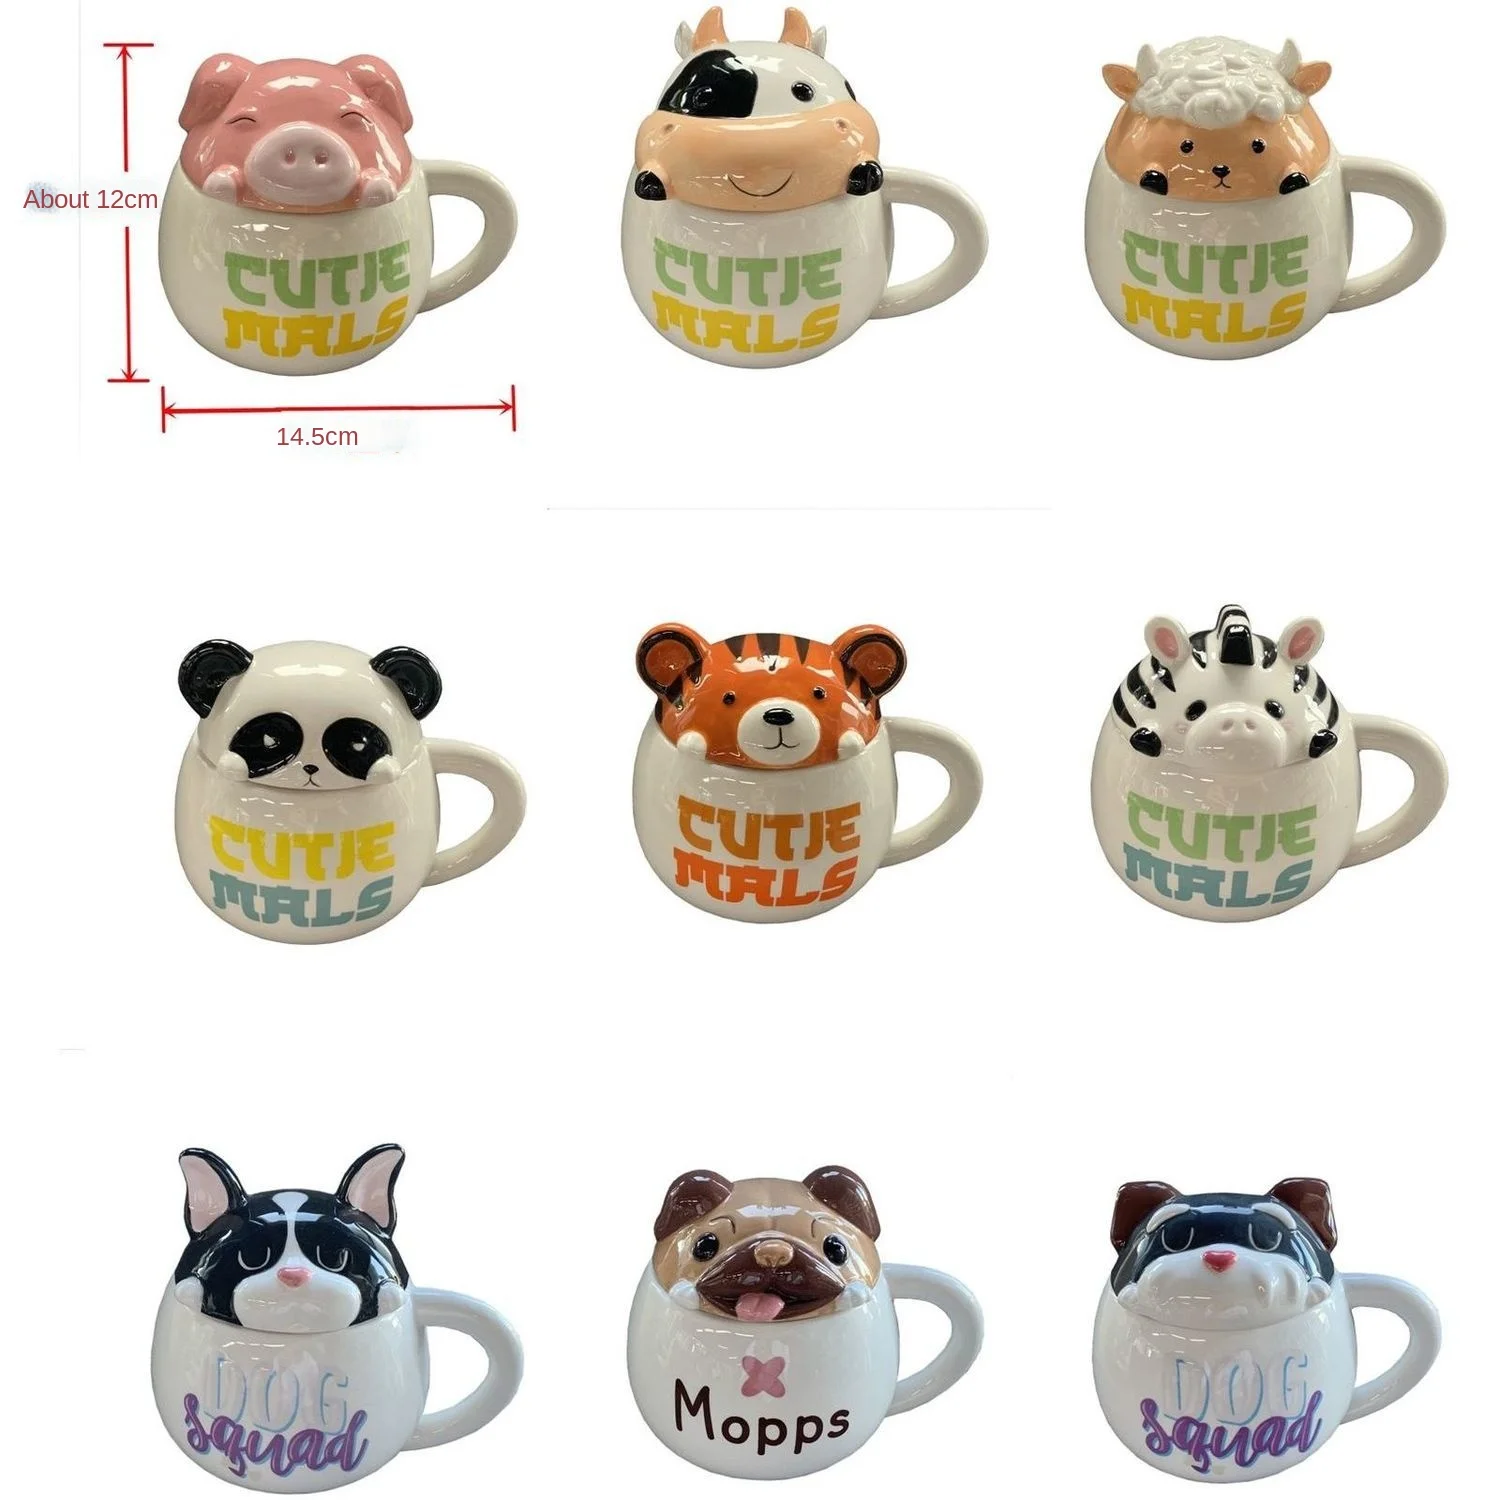 Creative Animal Shape Cup Cow Exquisite Handle Cup Sheep Dog Pig Cup Ceramic Coffee Cup with Lid Water Cup 400ml Birthday Gift